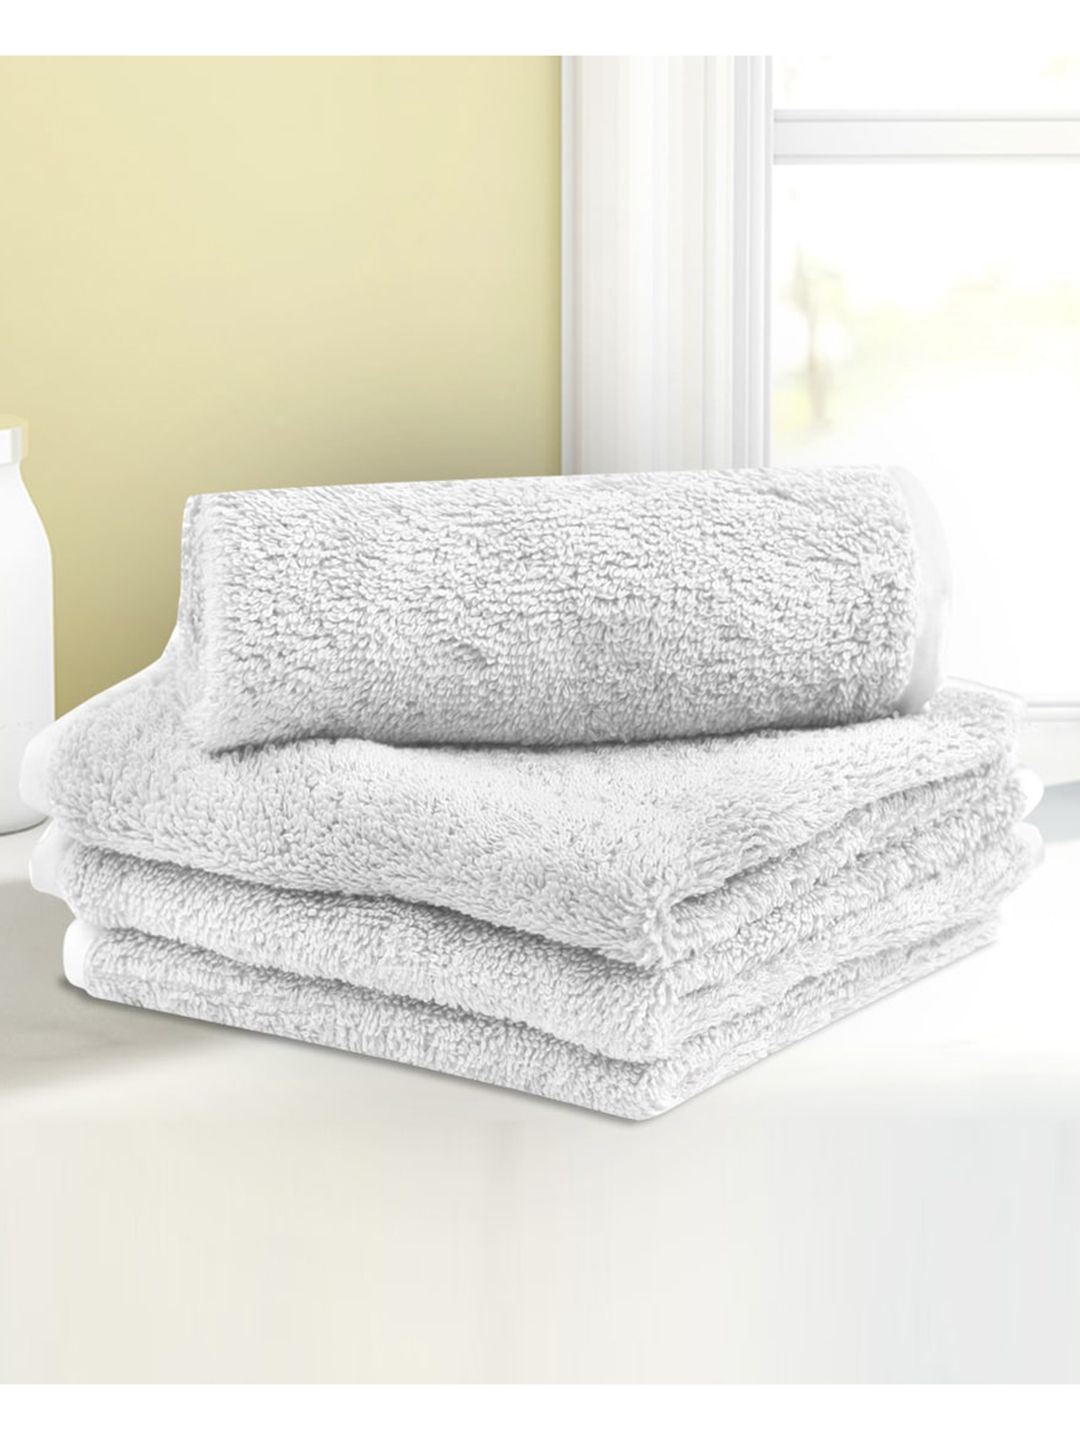 LUSH & BEYOND Set Of 4 White Solid 500 GSM Pure Cotton Face Towels Price in India